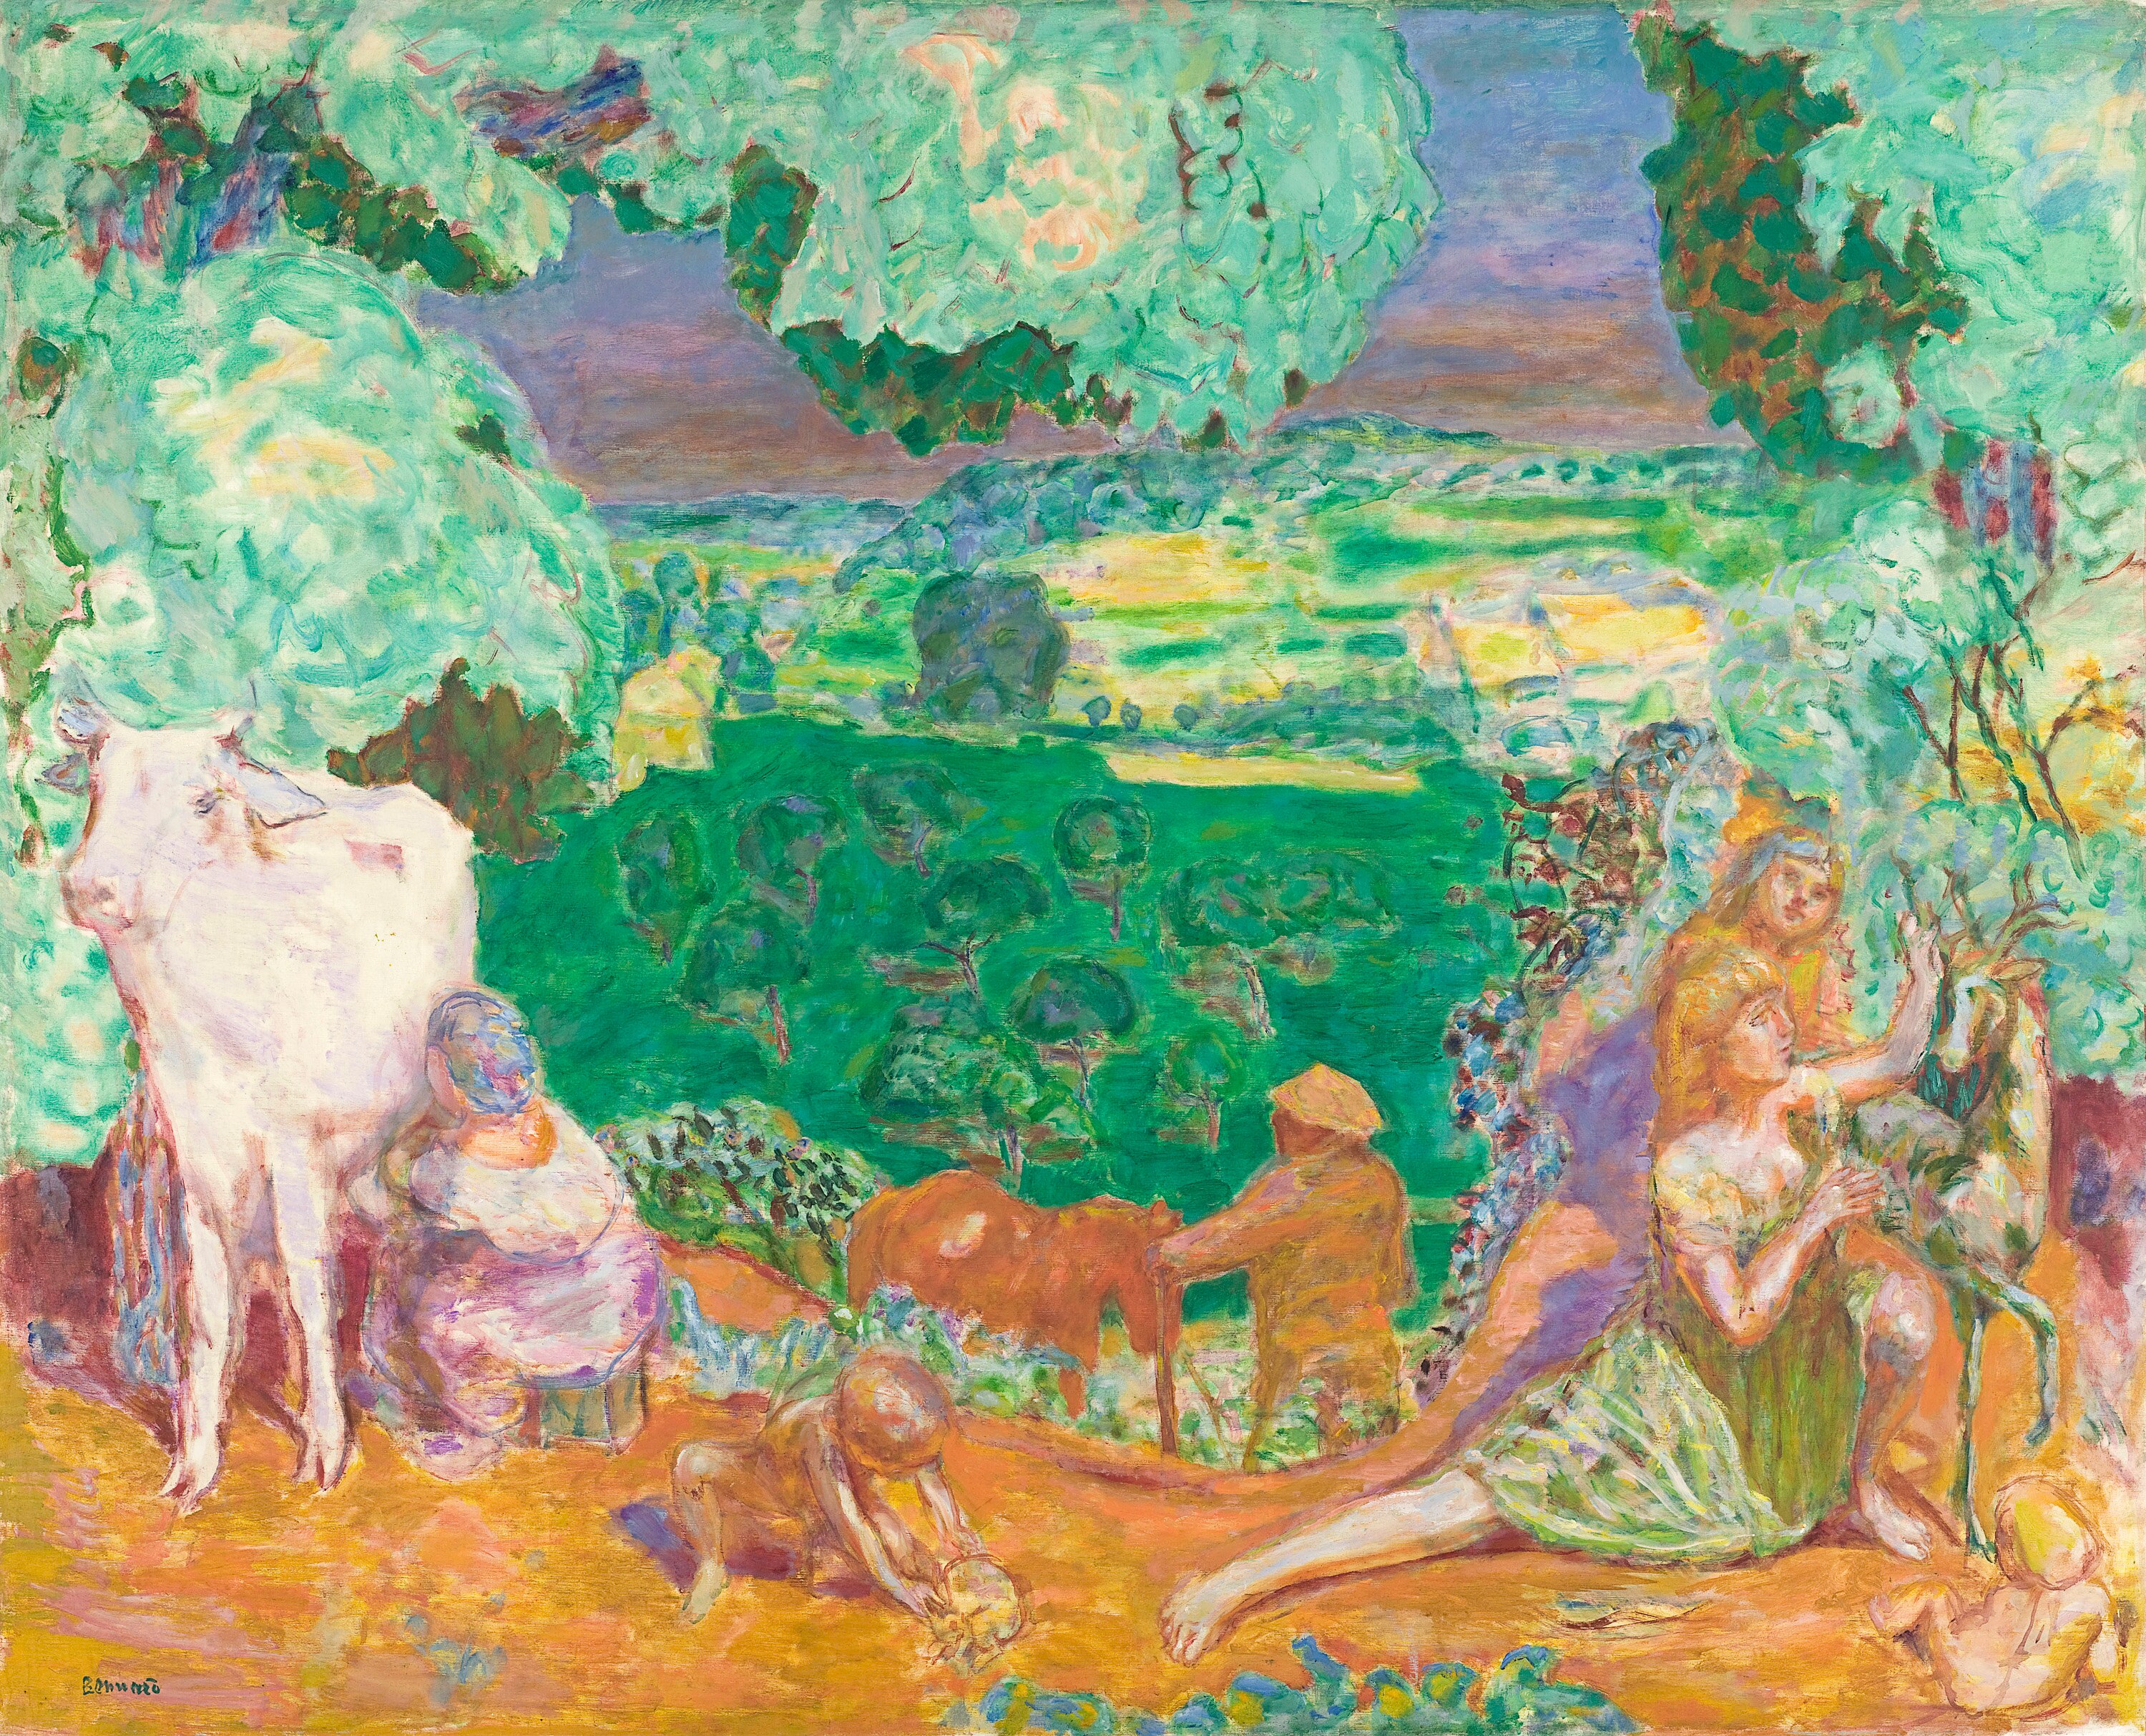 Oil painting of a pastoral, mythological scene with cow and nymphs, in bright colours.